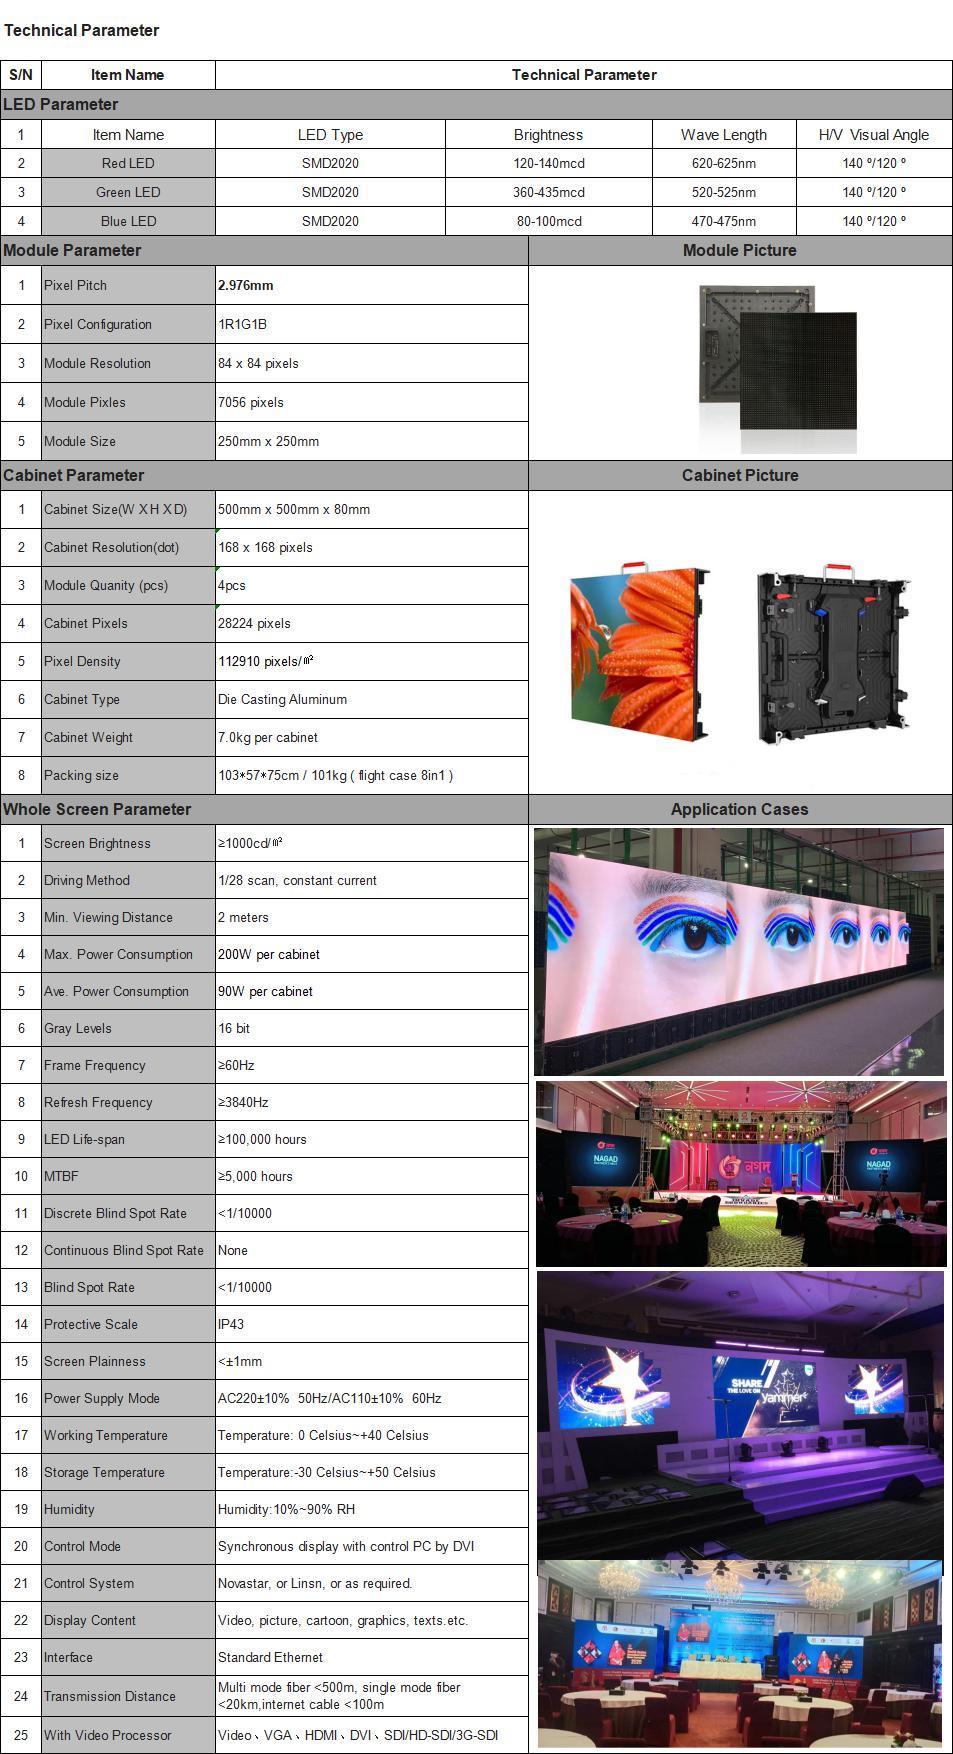 P2.9 Stage Backdrop Wall Stage Decoration Lighting Rental LED Display Board